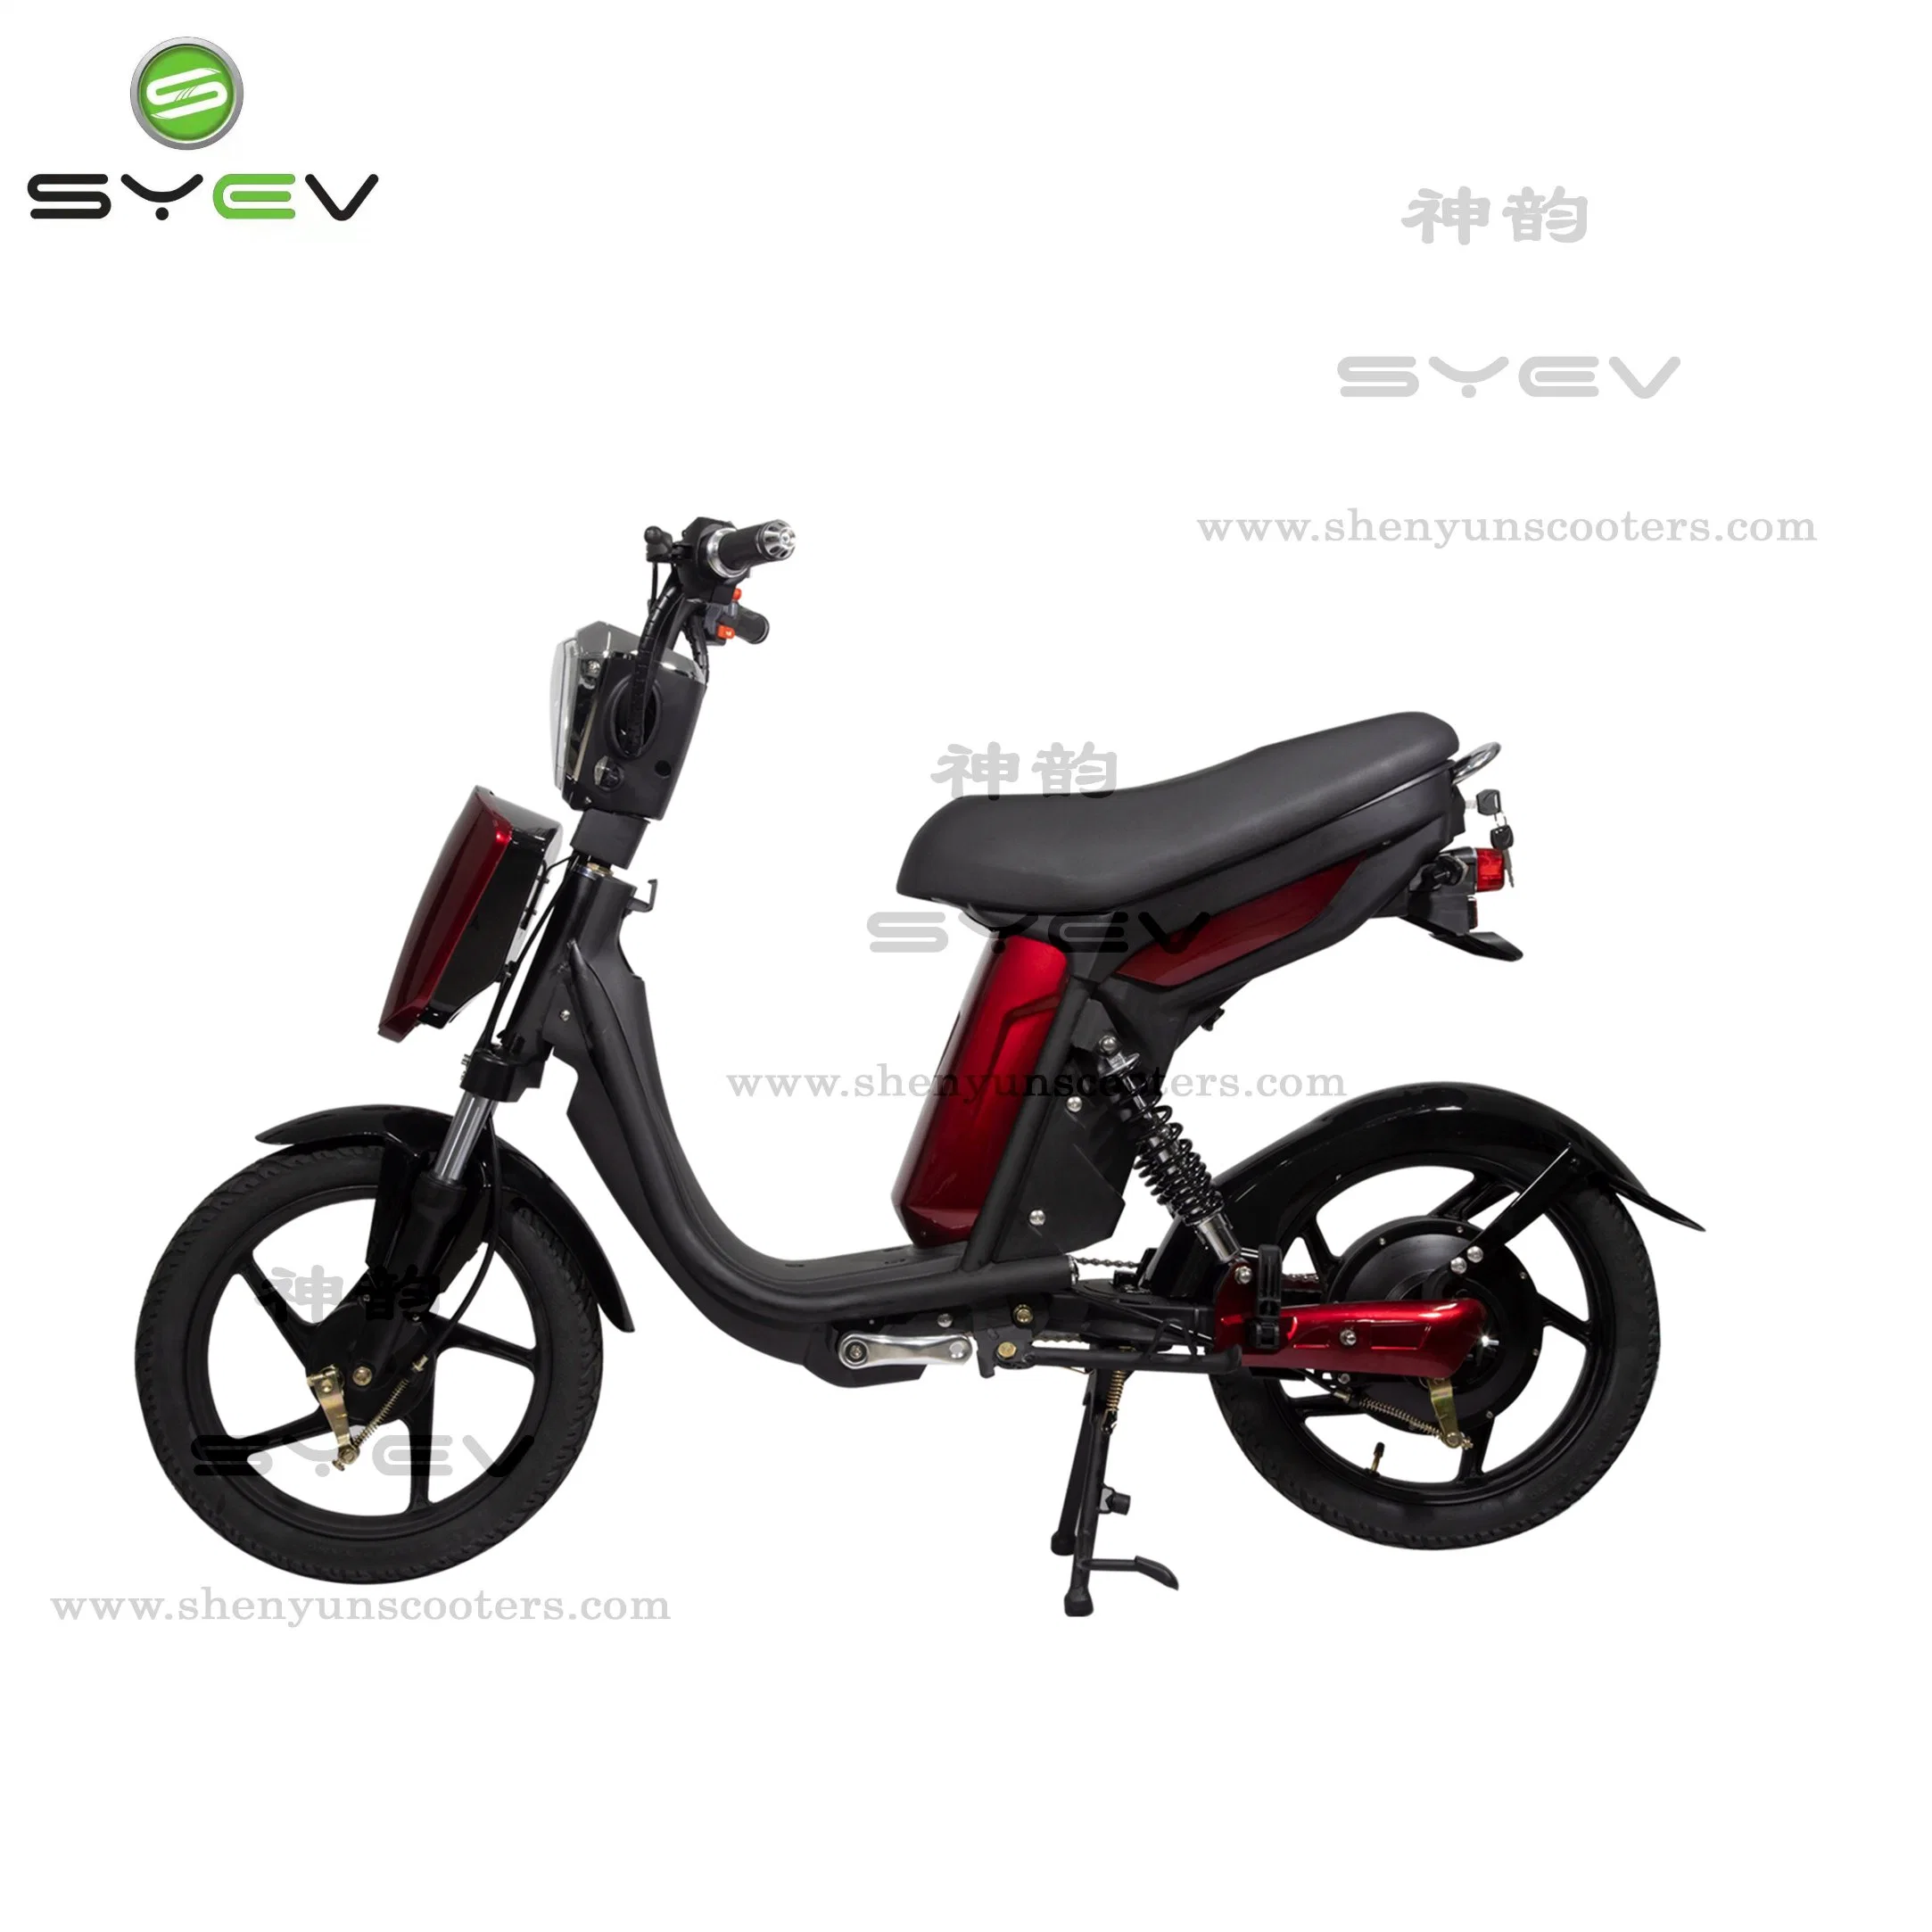 Chinese Motor Electirc Motorbike 350W Electric Motorcycle 4812/20/26ah Portable Battery Electric Scooter Bike for Adult